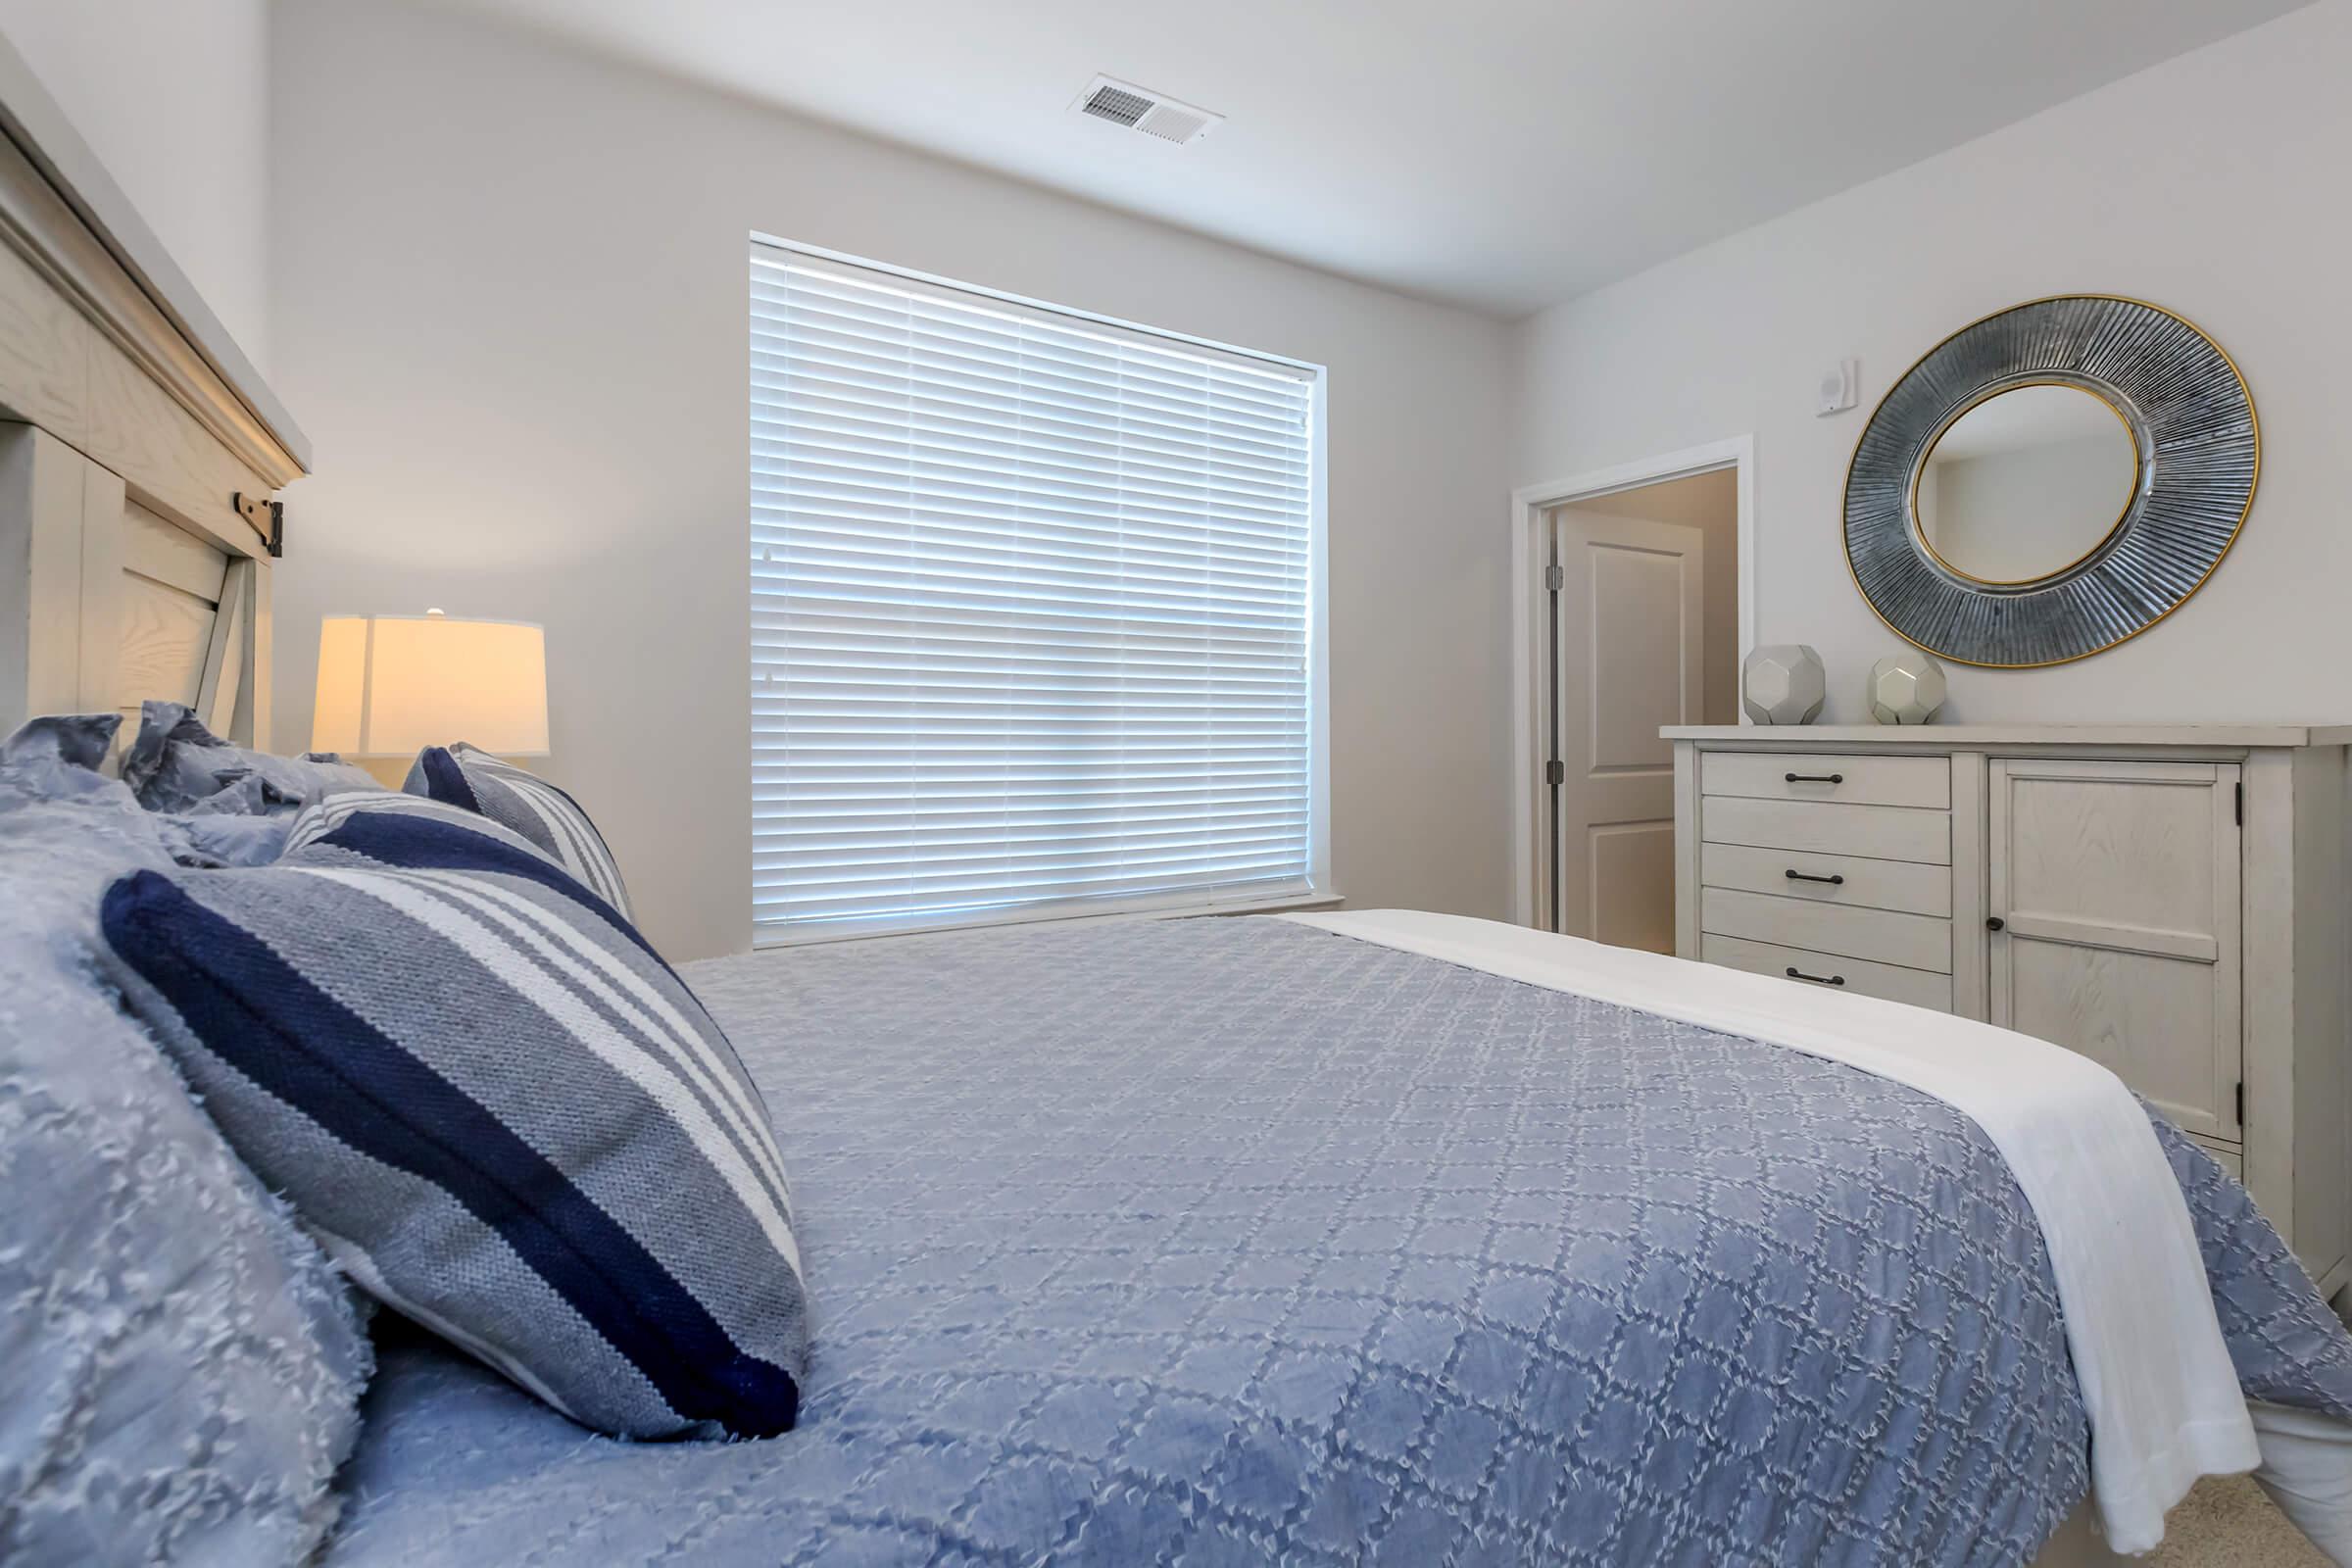 Stay In Bed At Riverstone Apartments At Long Shoals In Arden, NC